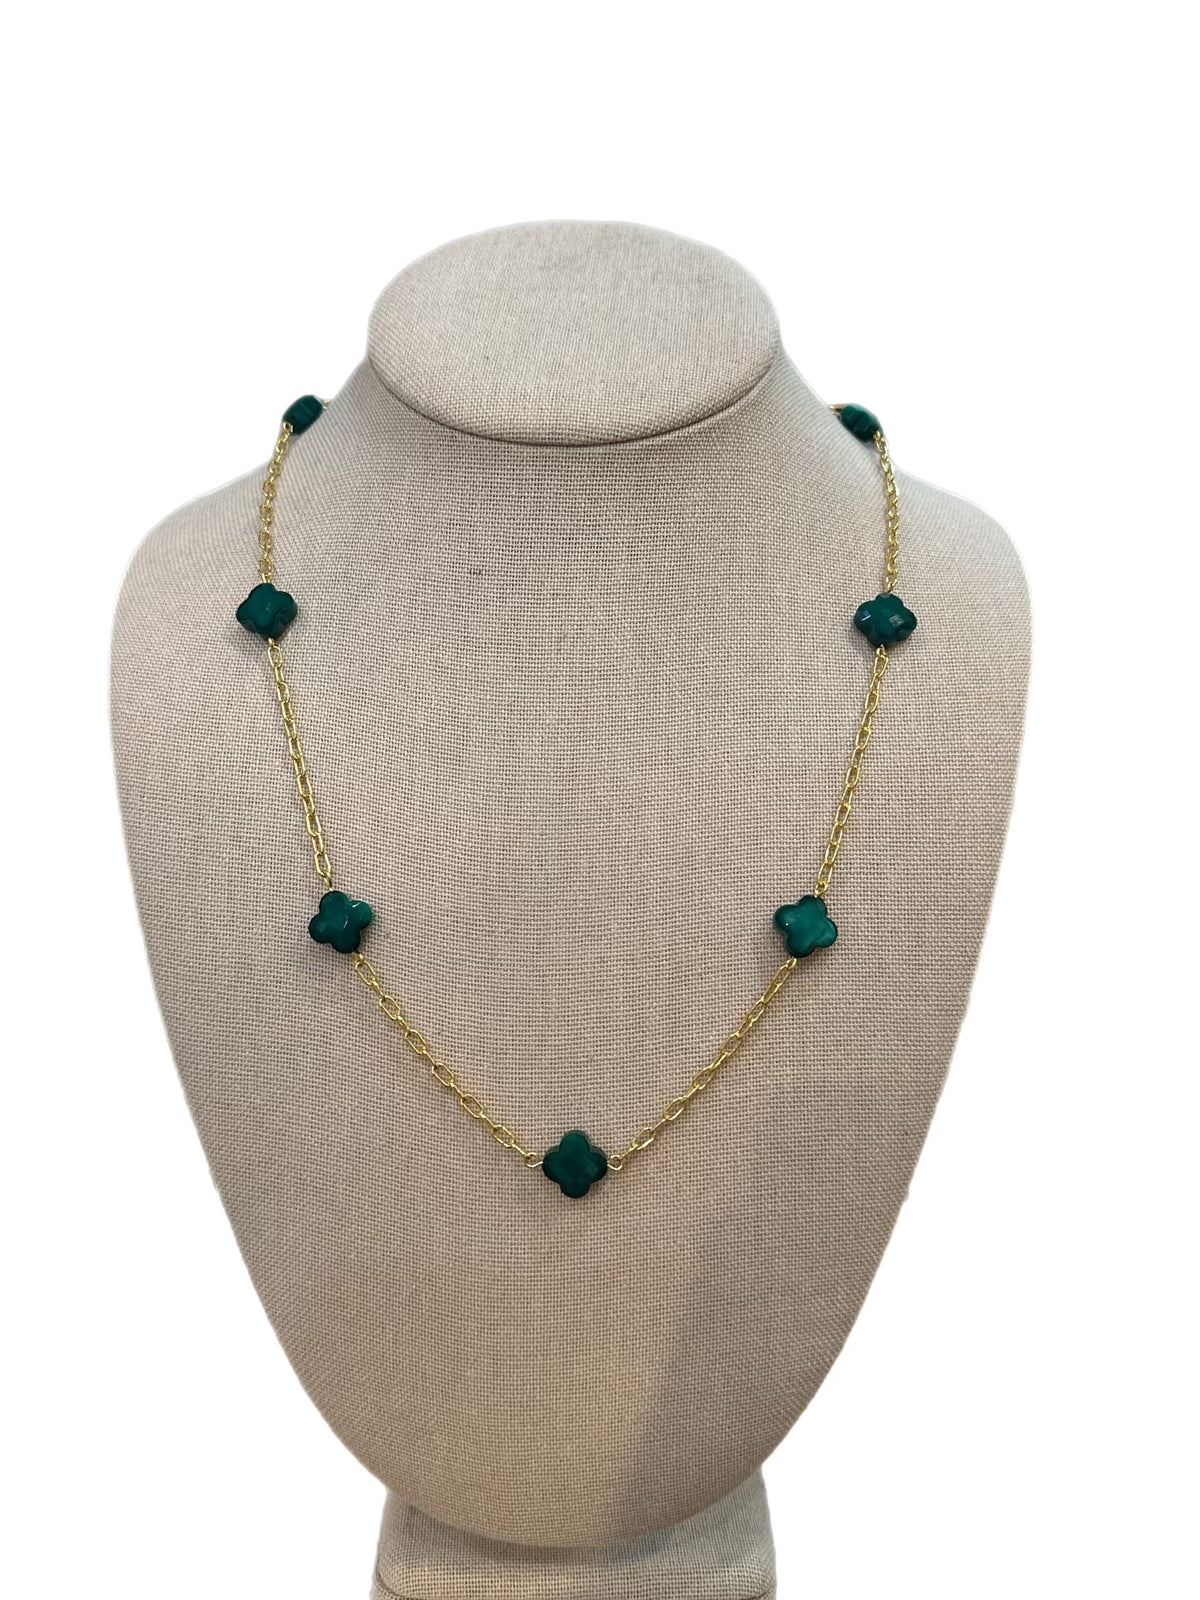 Locally Made Clover Necklaces by Charzie Jewelry